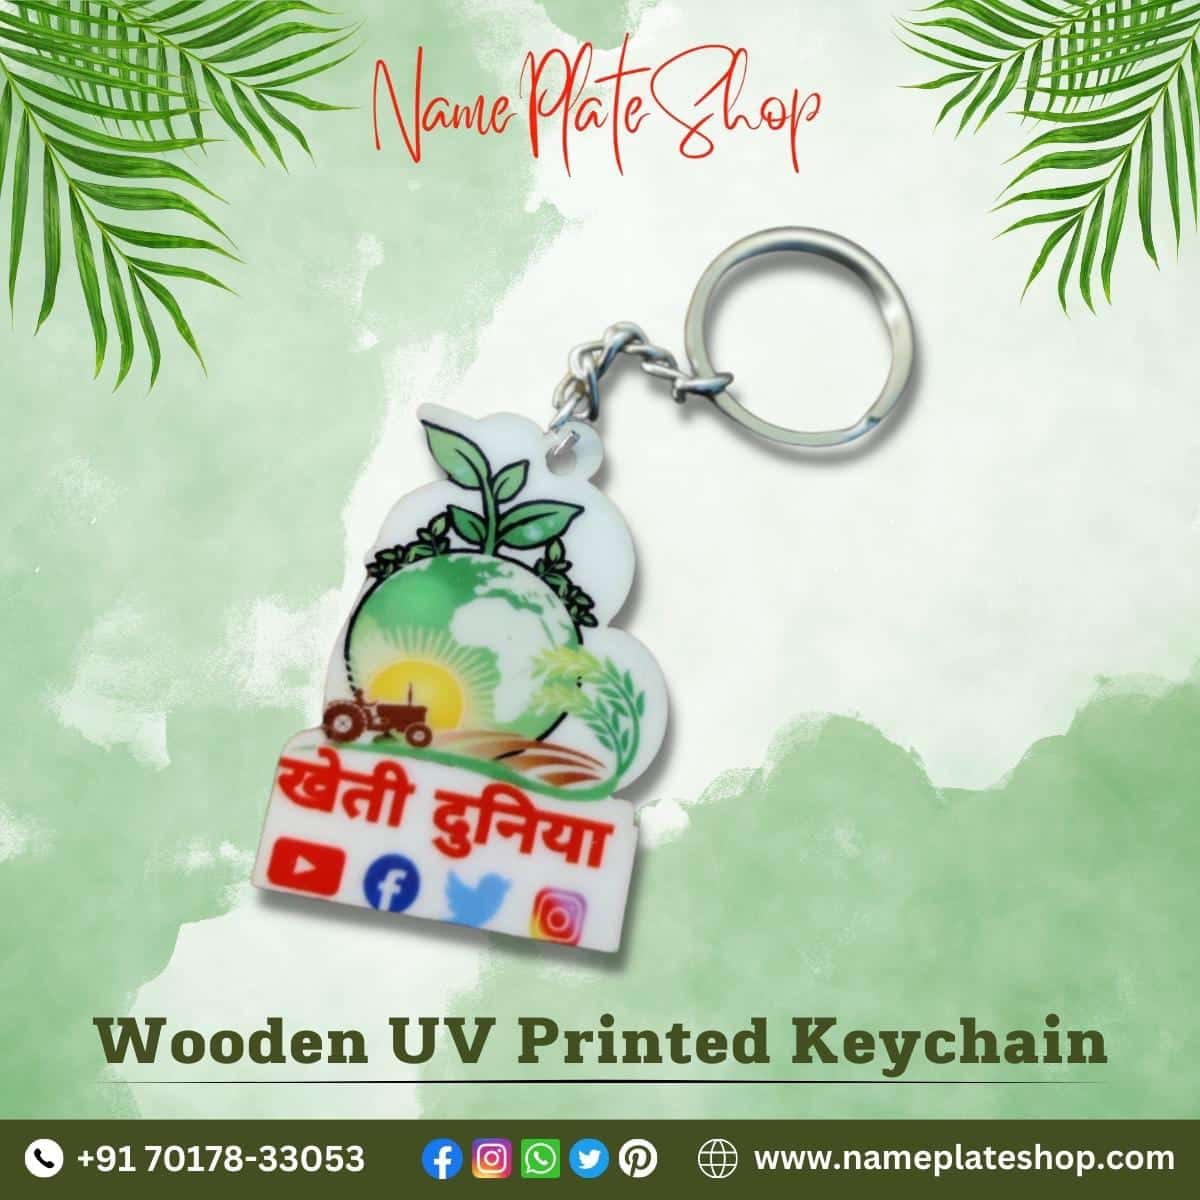 Try Buying New UV Printed Keychain Creative Designs